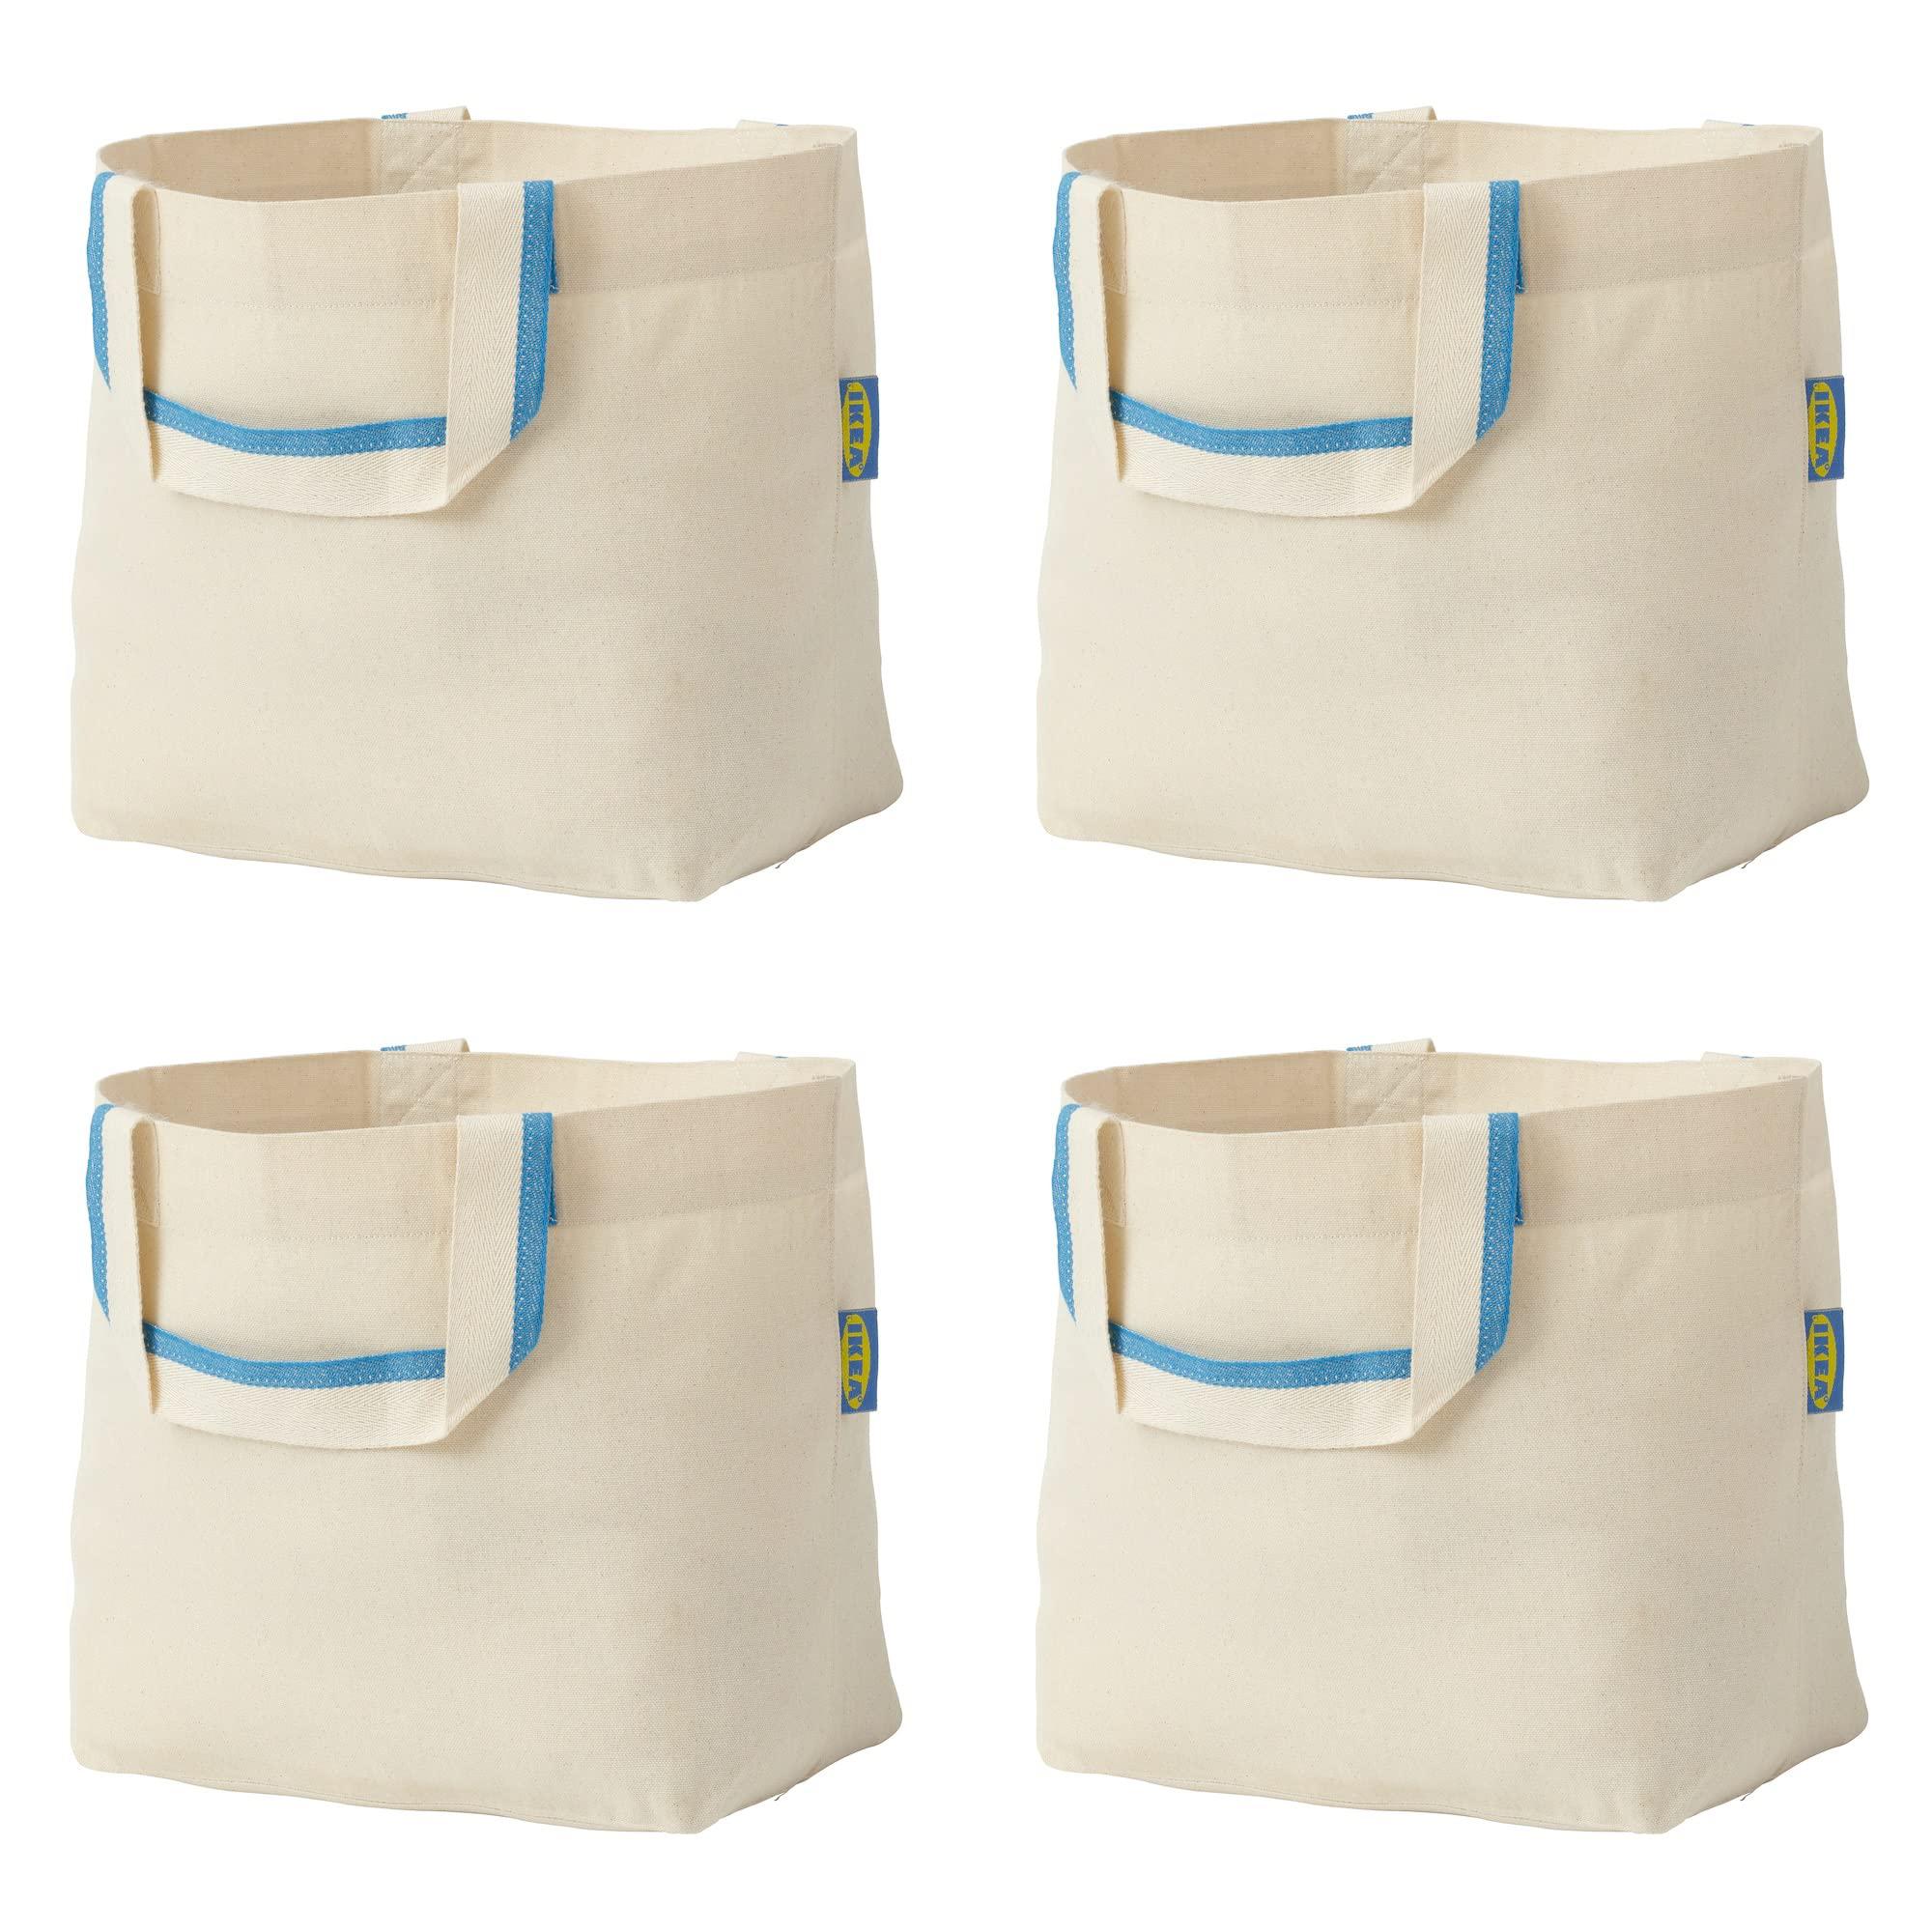 i-k-e-a foldable spikrak shopping bags, reusable grocery tote bag lightweight strong & durable cotton natural 3 gallons, 4 pa